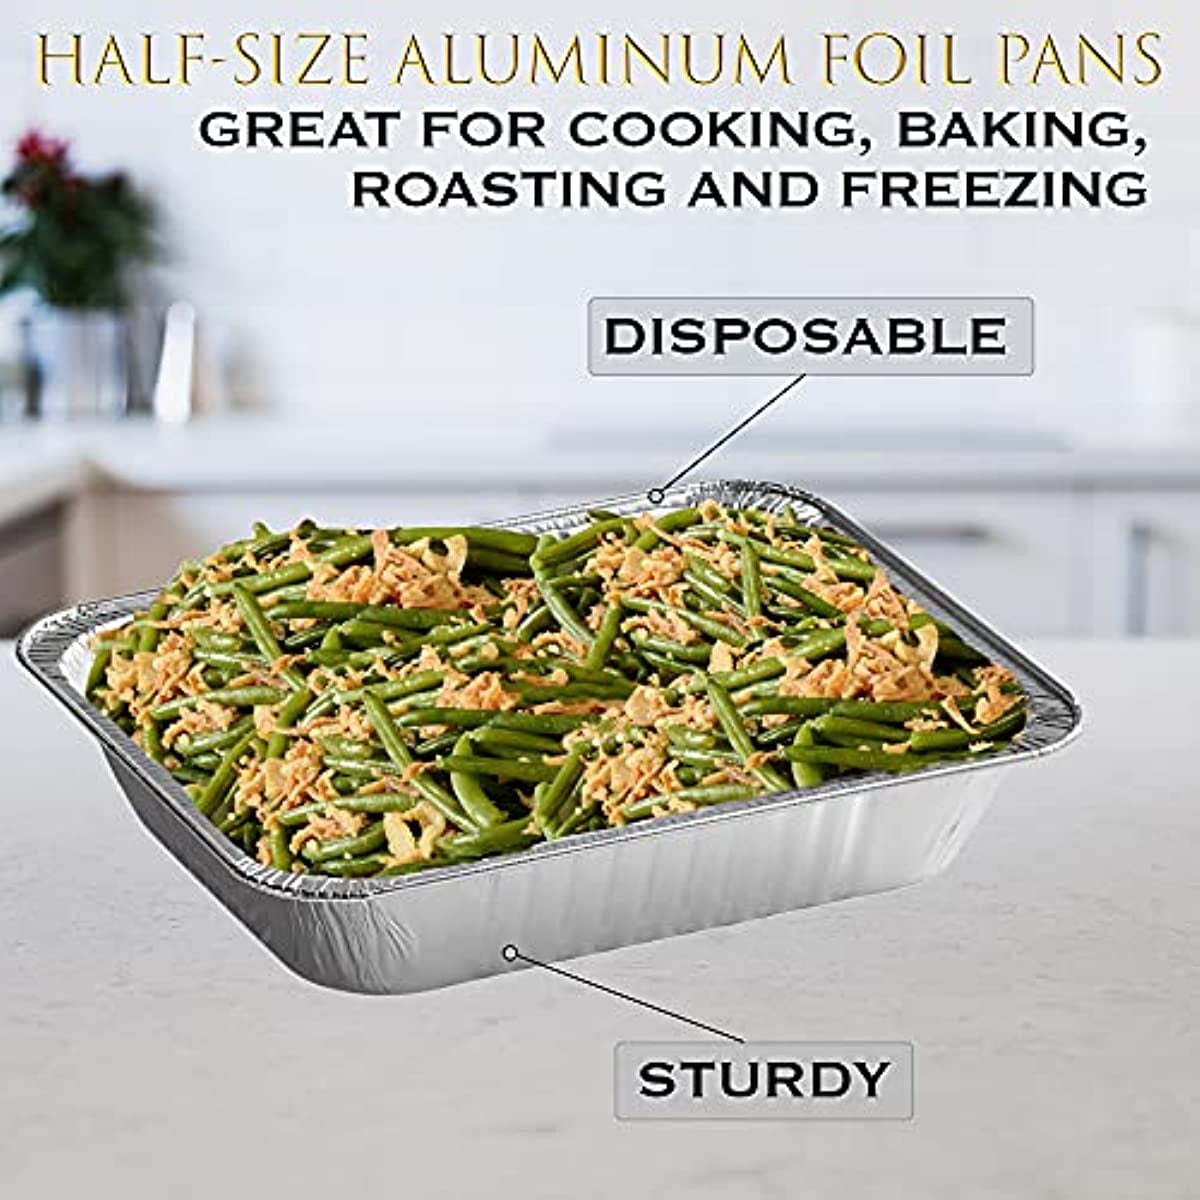 9x13 Inches Rectangular Aluminum Foil Pans, Disposable Baking Pans, Square Aluminum  Baking Pan, Foil Pans Are Great For Cooking, Heating, Storing, Preparing  Food